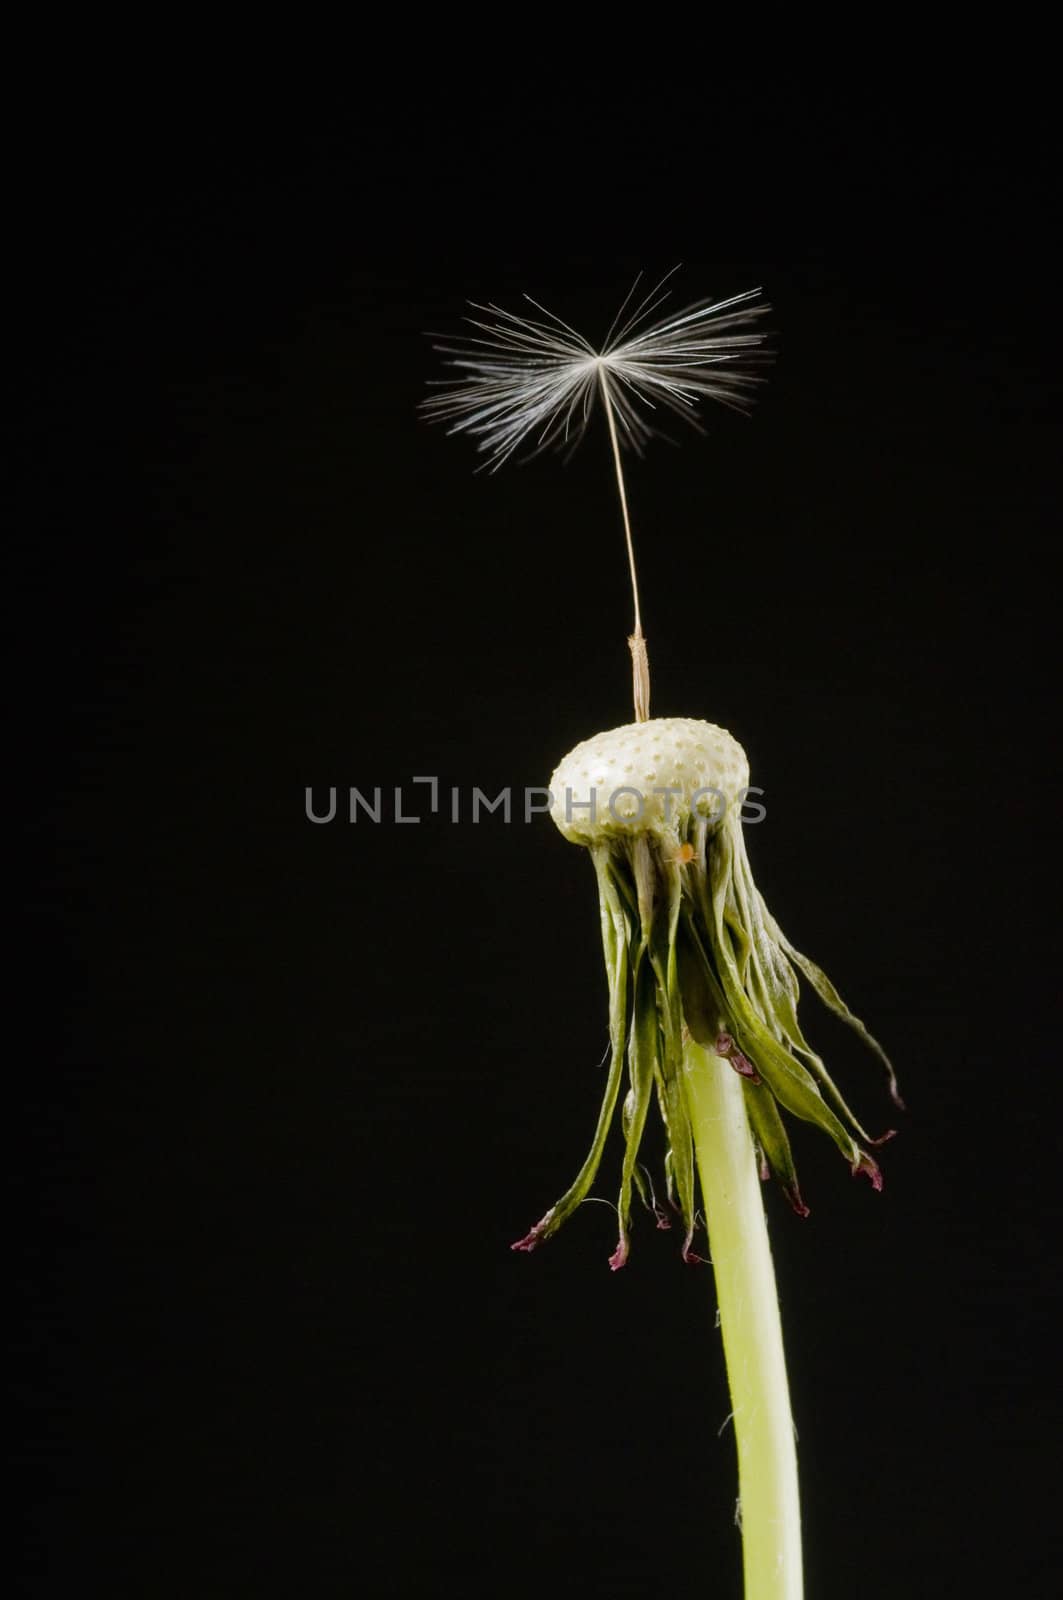 Dandelion head with a single seed on black background